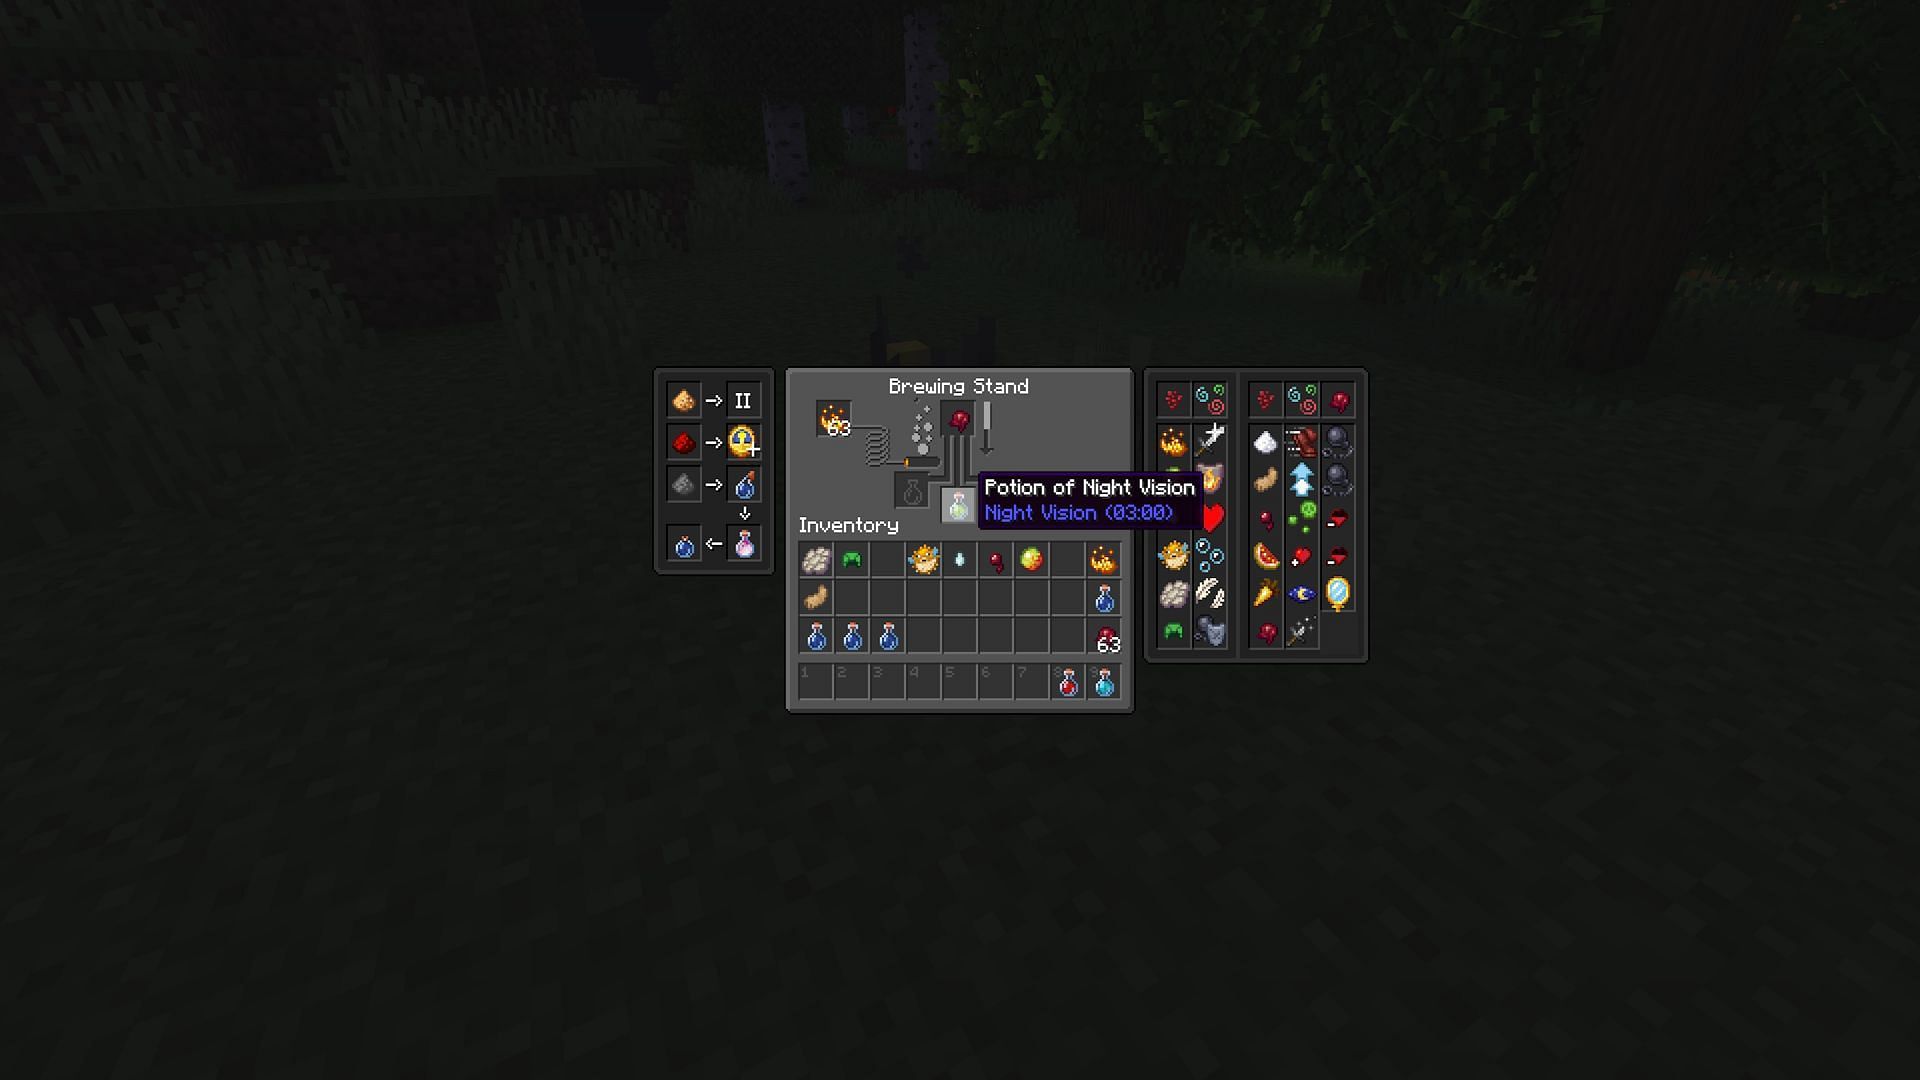 Invisibility potions are the corrupted version of night vision potions (Image via Mojang)